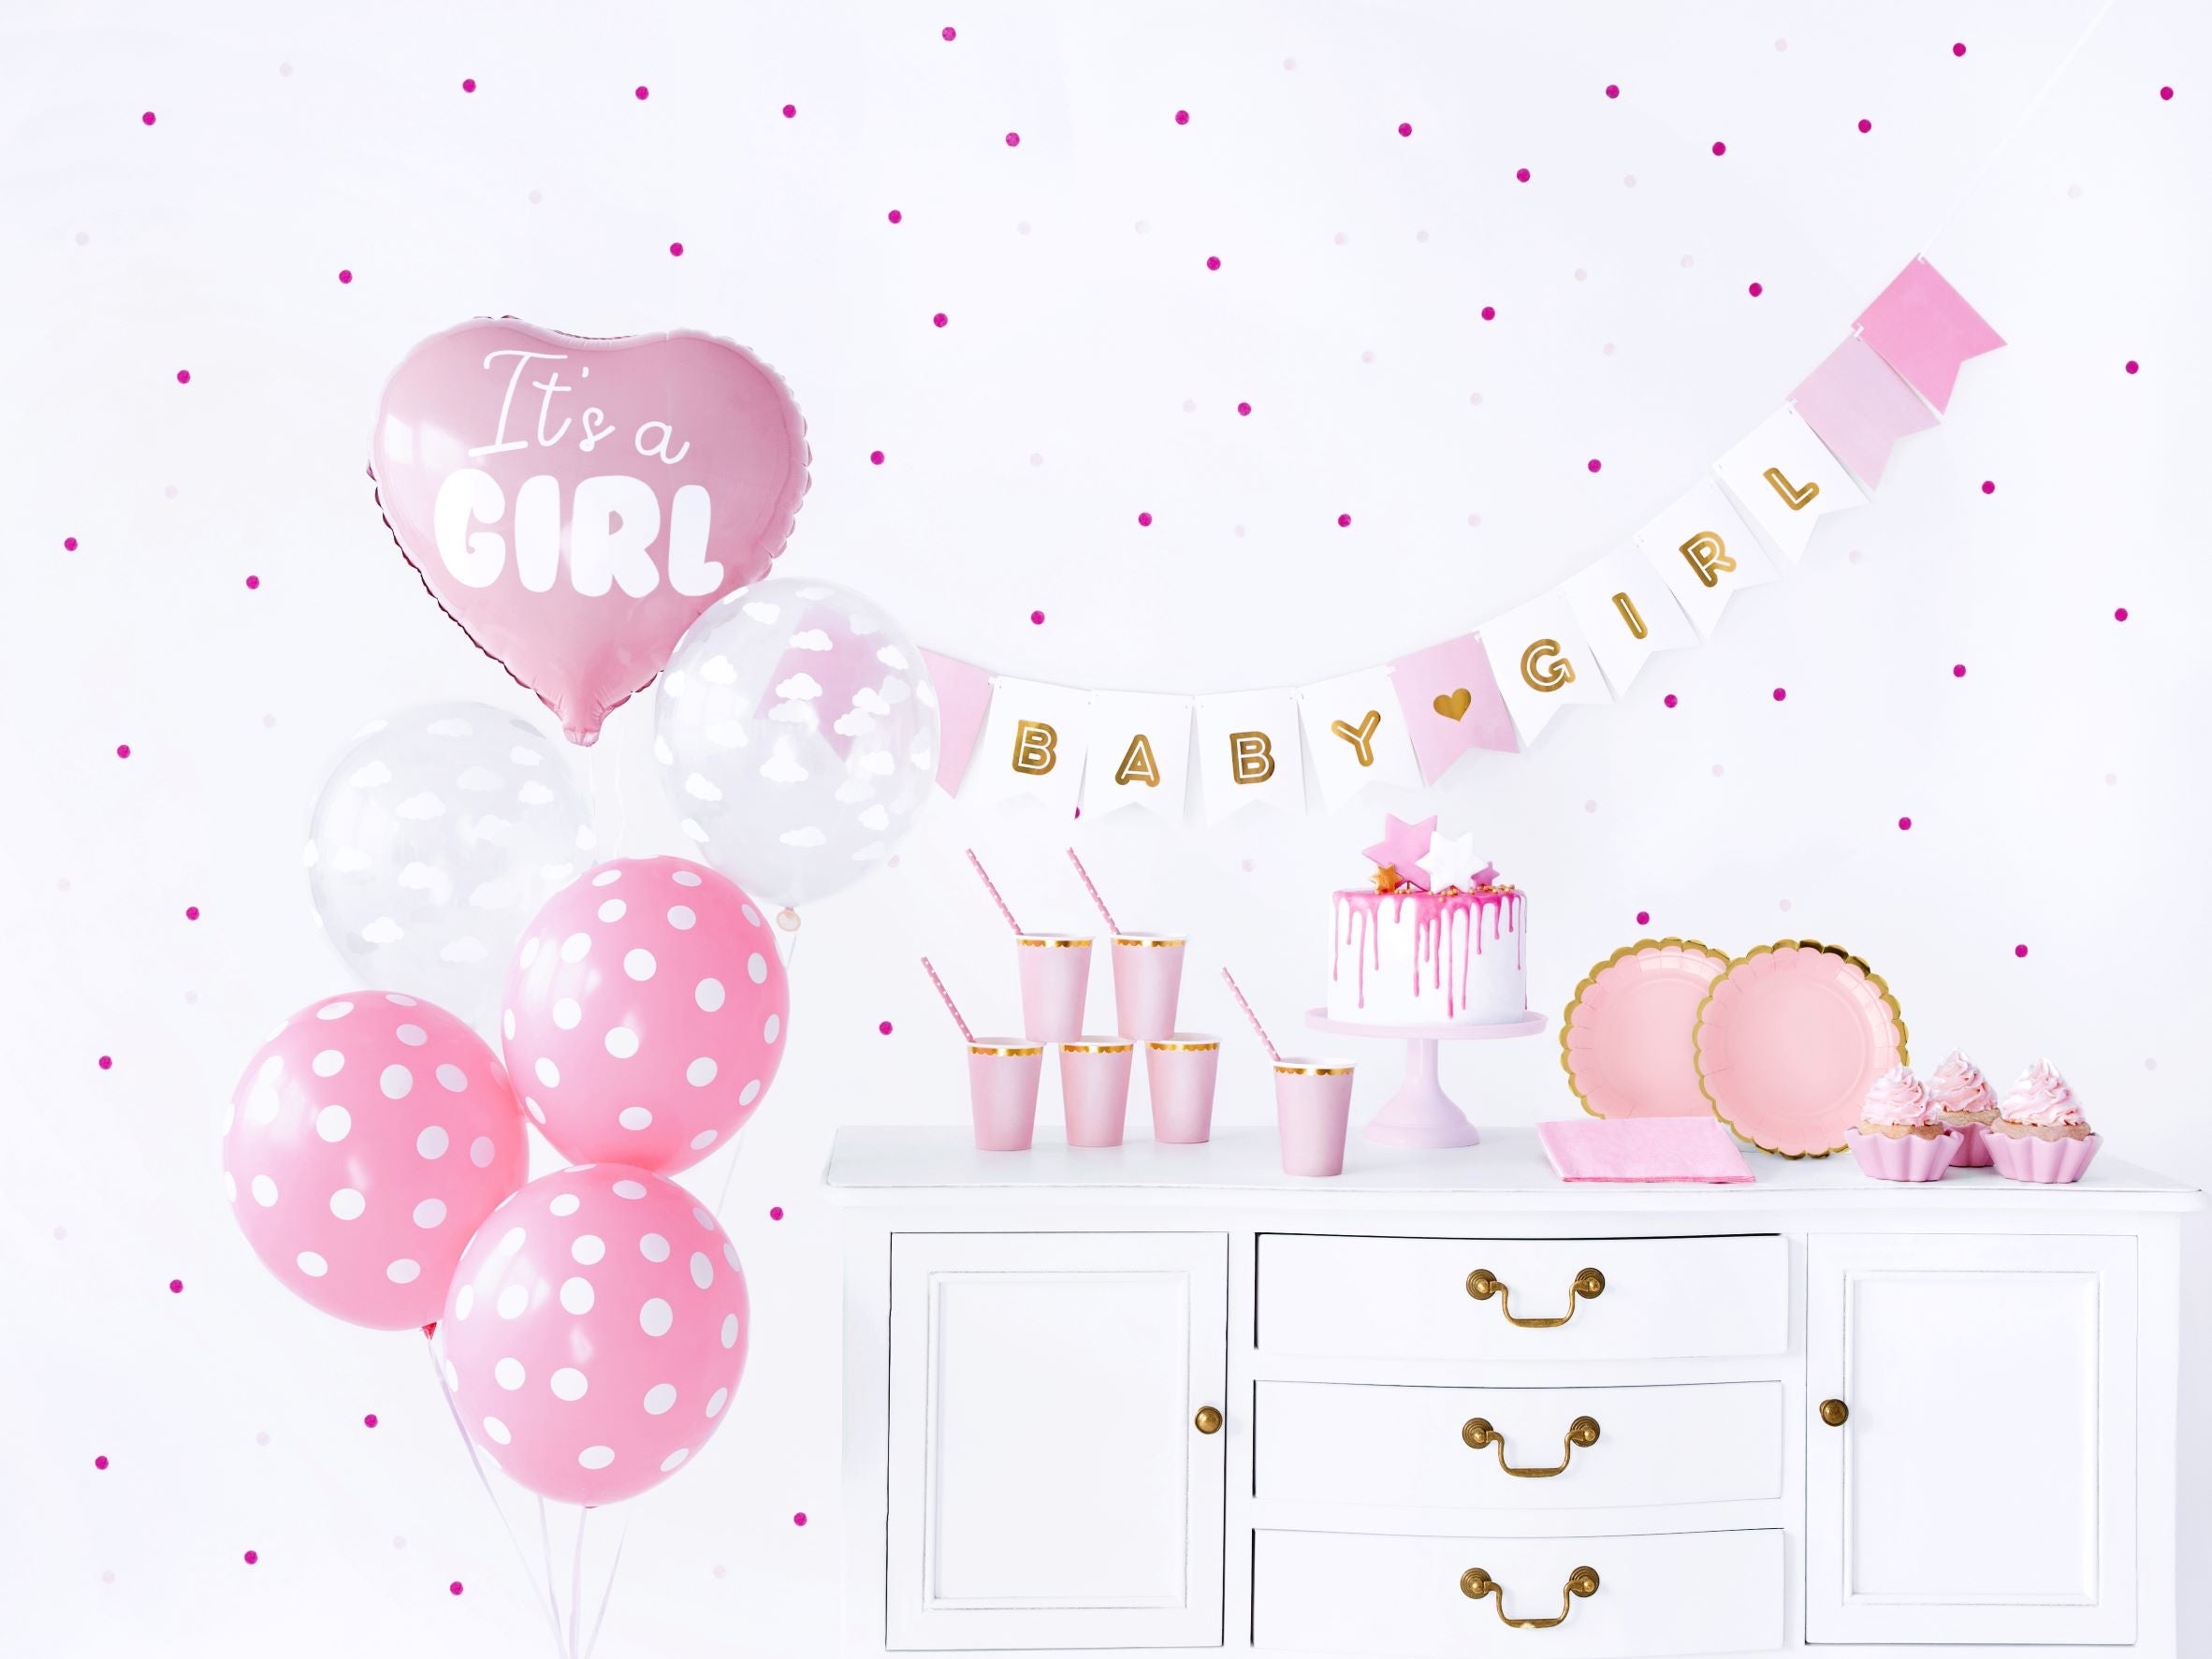 It's a Girl Baby Shower Party Kit